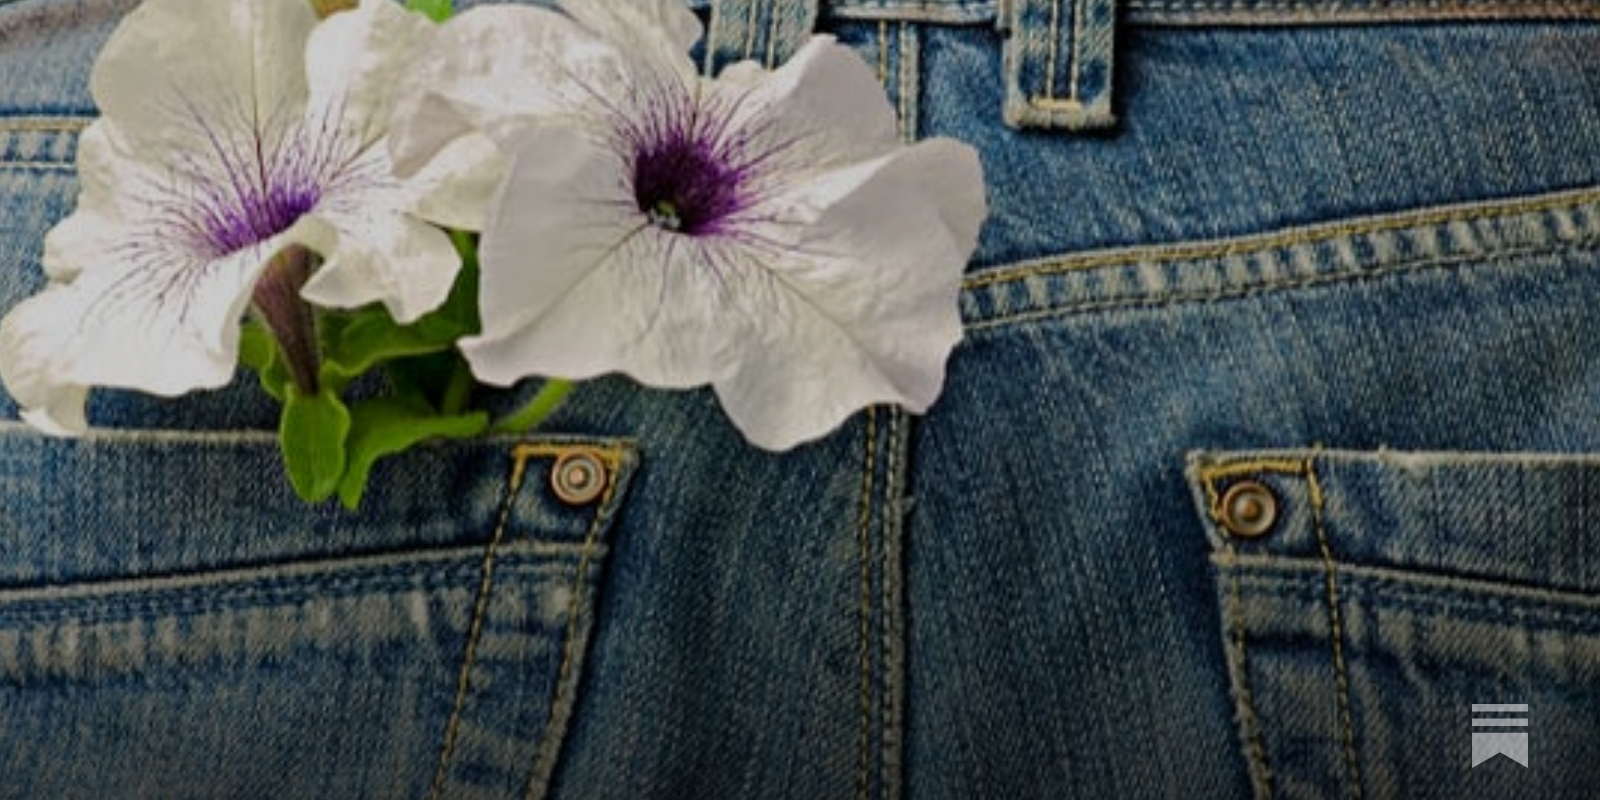 The Truth Behind Why Women's Clothing Doesn't Have Pockets, As